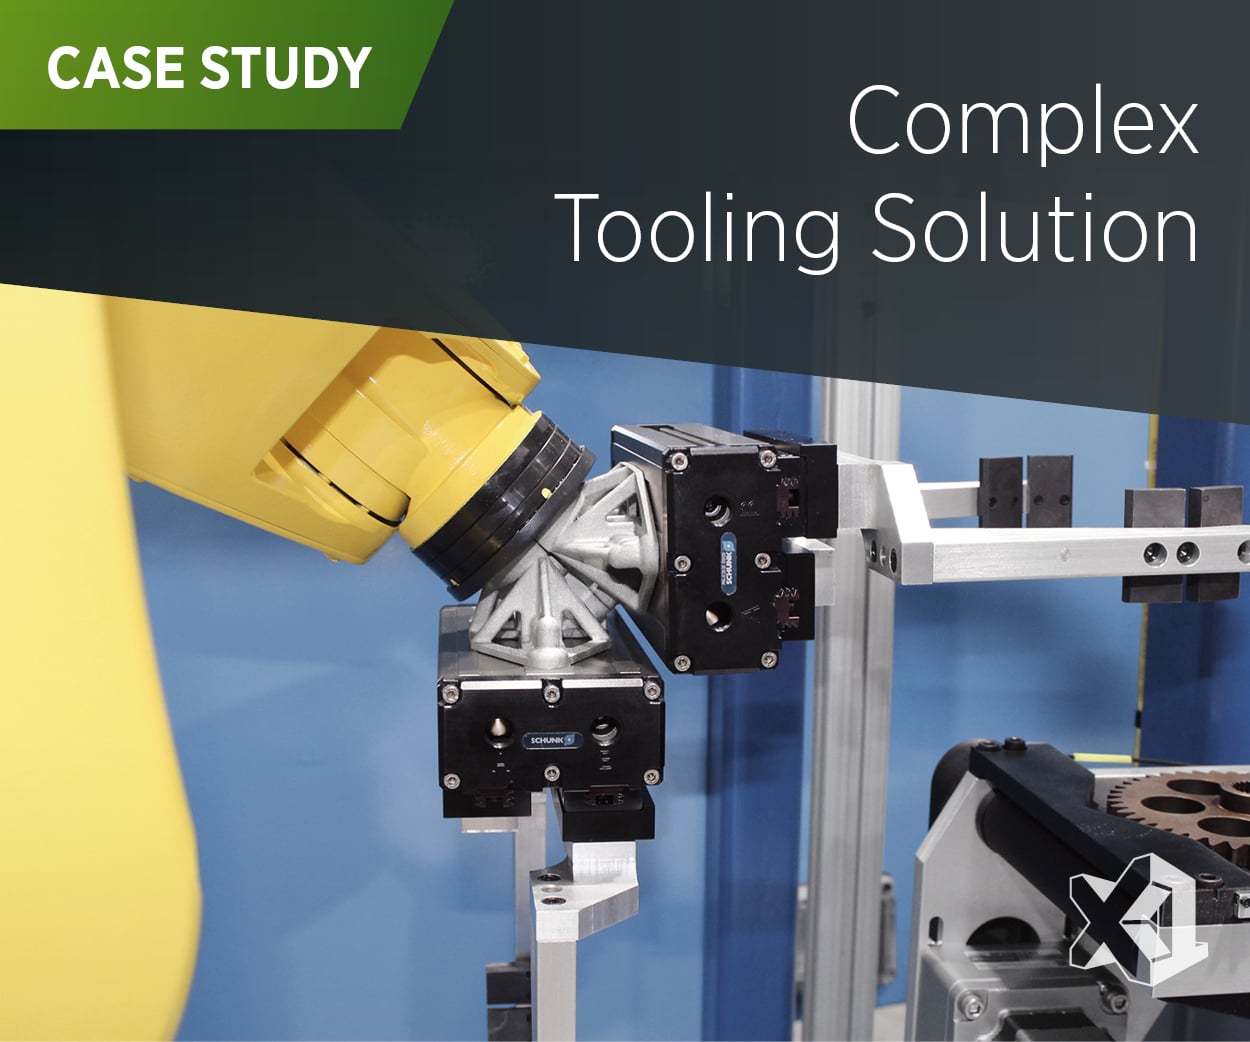 Durable, Lightweight and Affordable Metal End-of-Arm Tooling